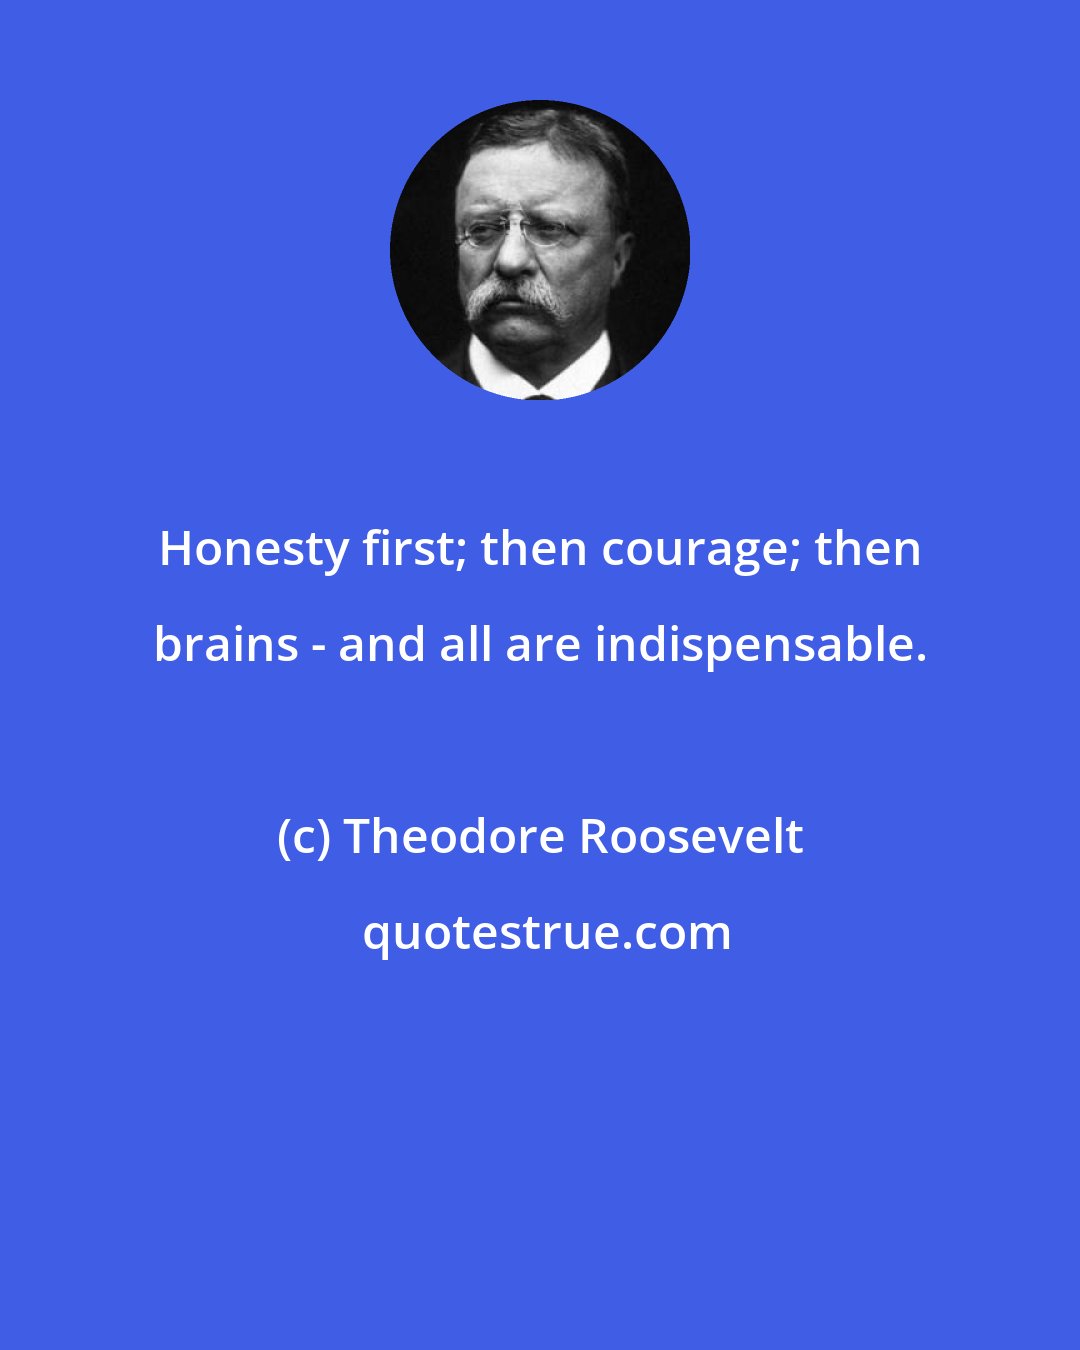 Theodore Roosevelt: Honesty first; then courage; then brains - and all are indispensable.